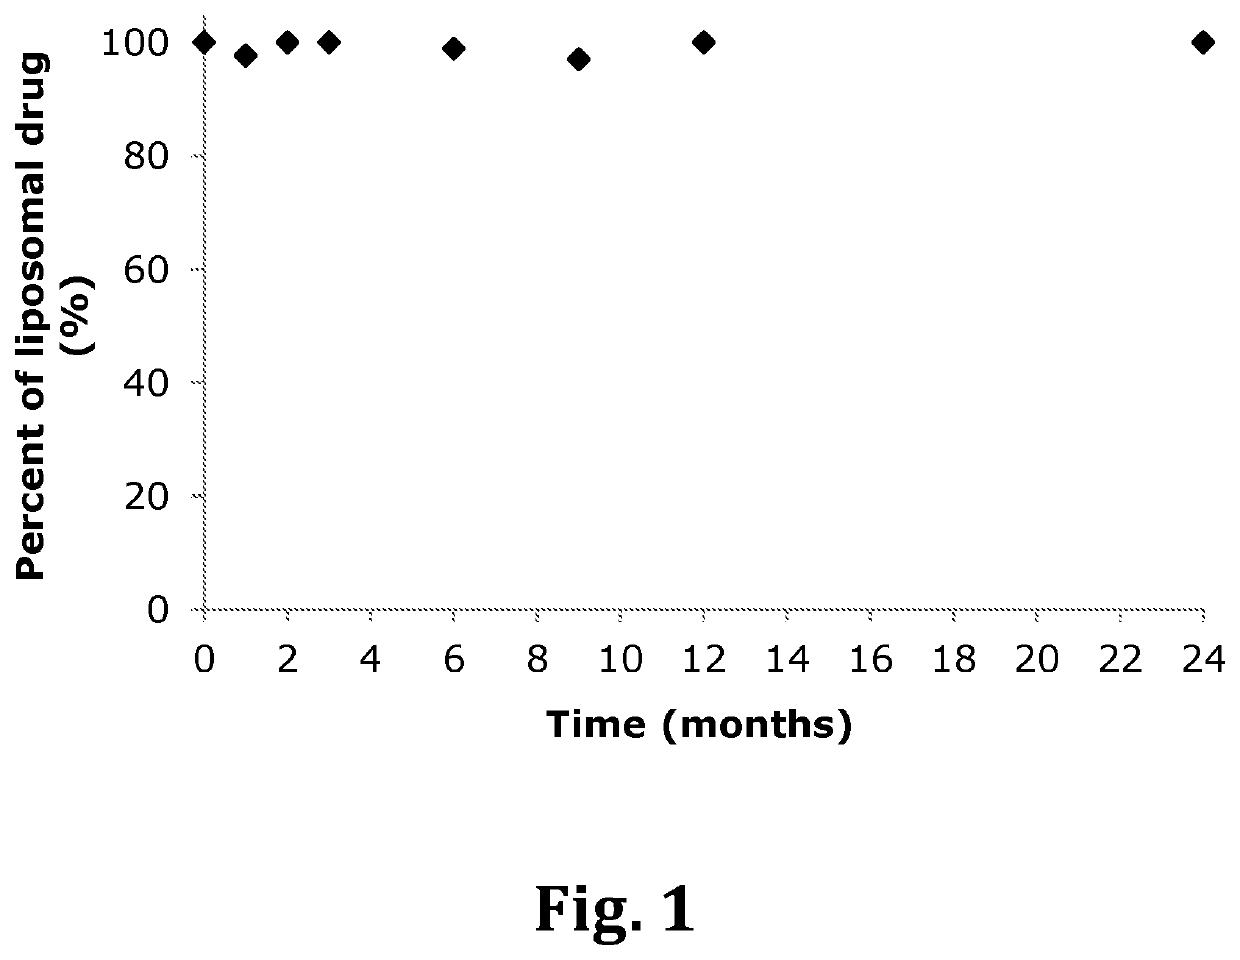 Inhalable liposomal sustained release composition for use in treating pulmonary diseases